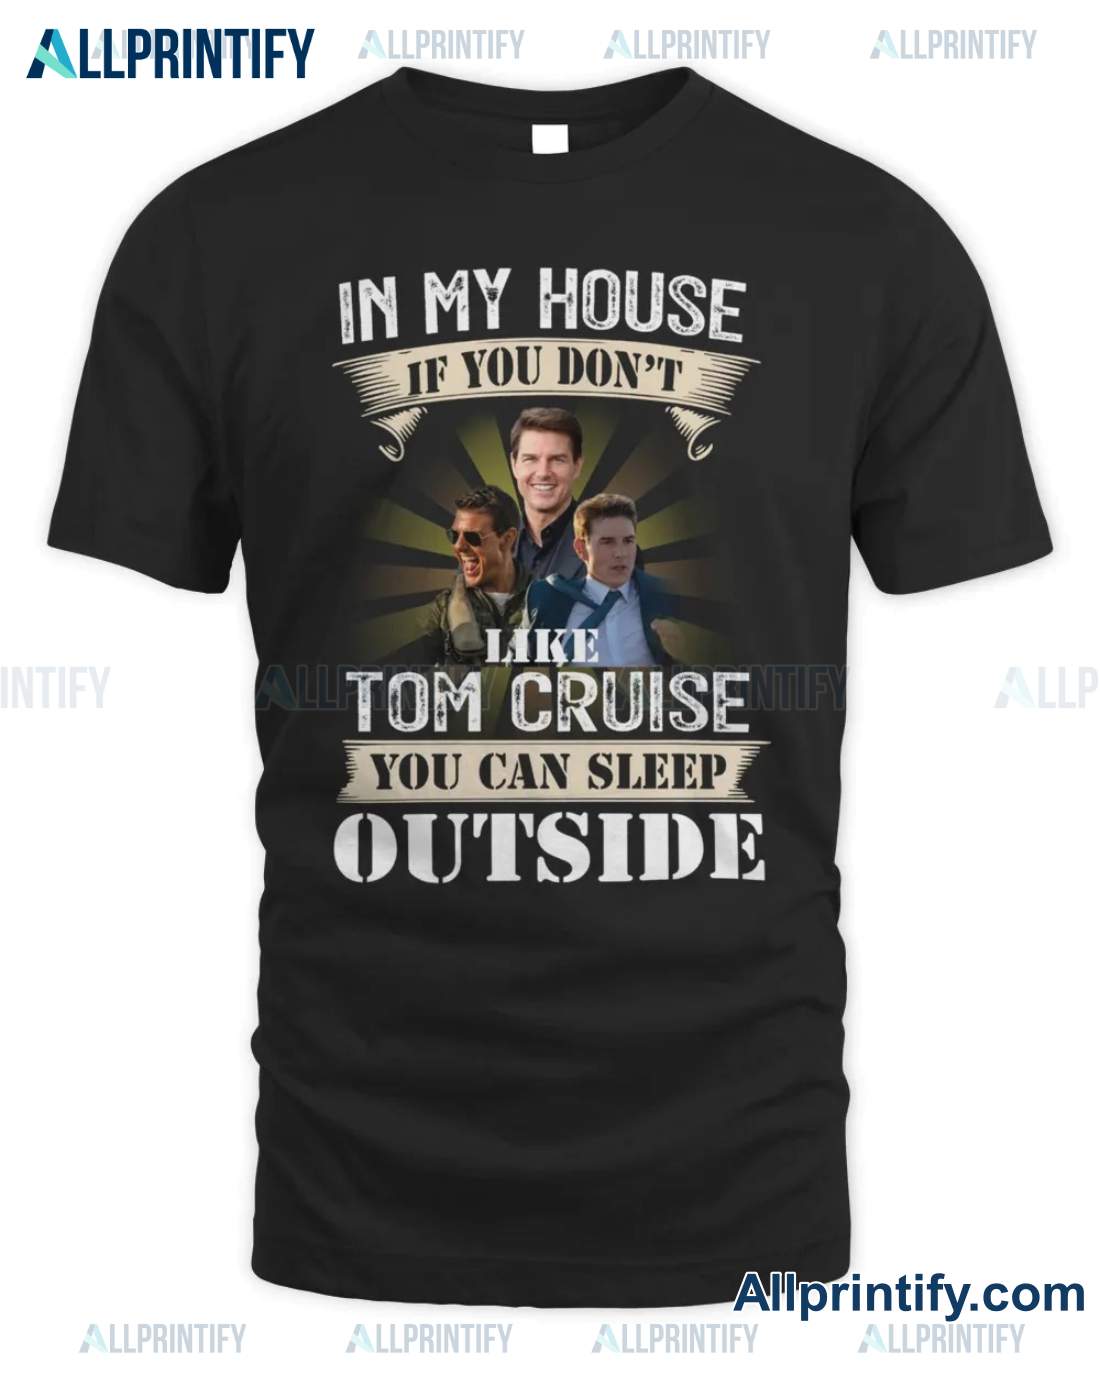 In My House If You Don't Like Tom Cruise You Can Sleep Outside Shirt a